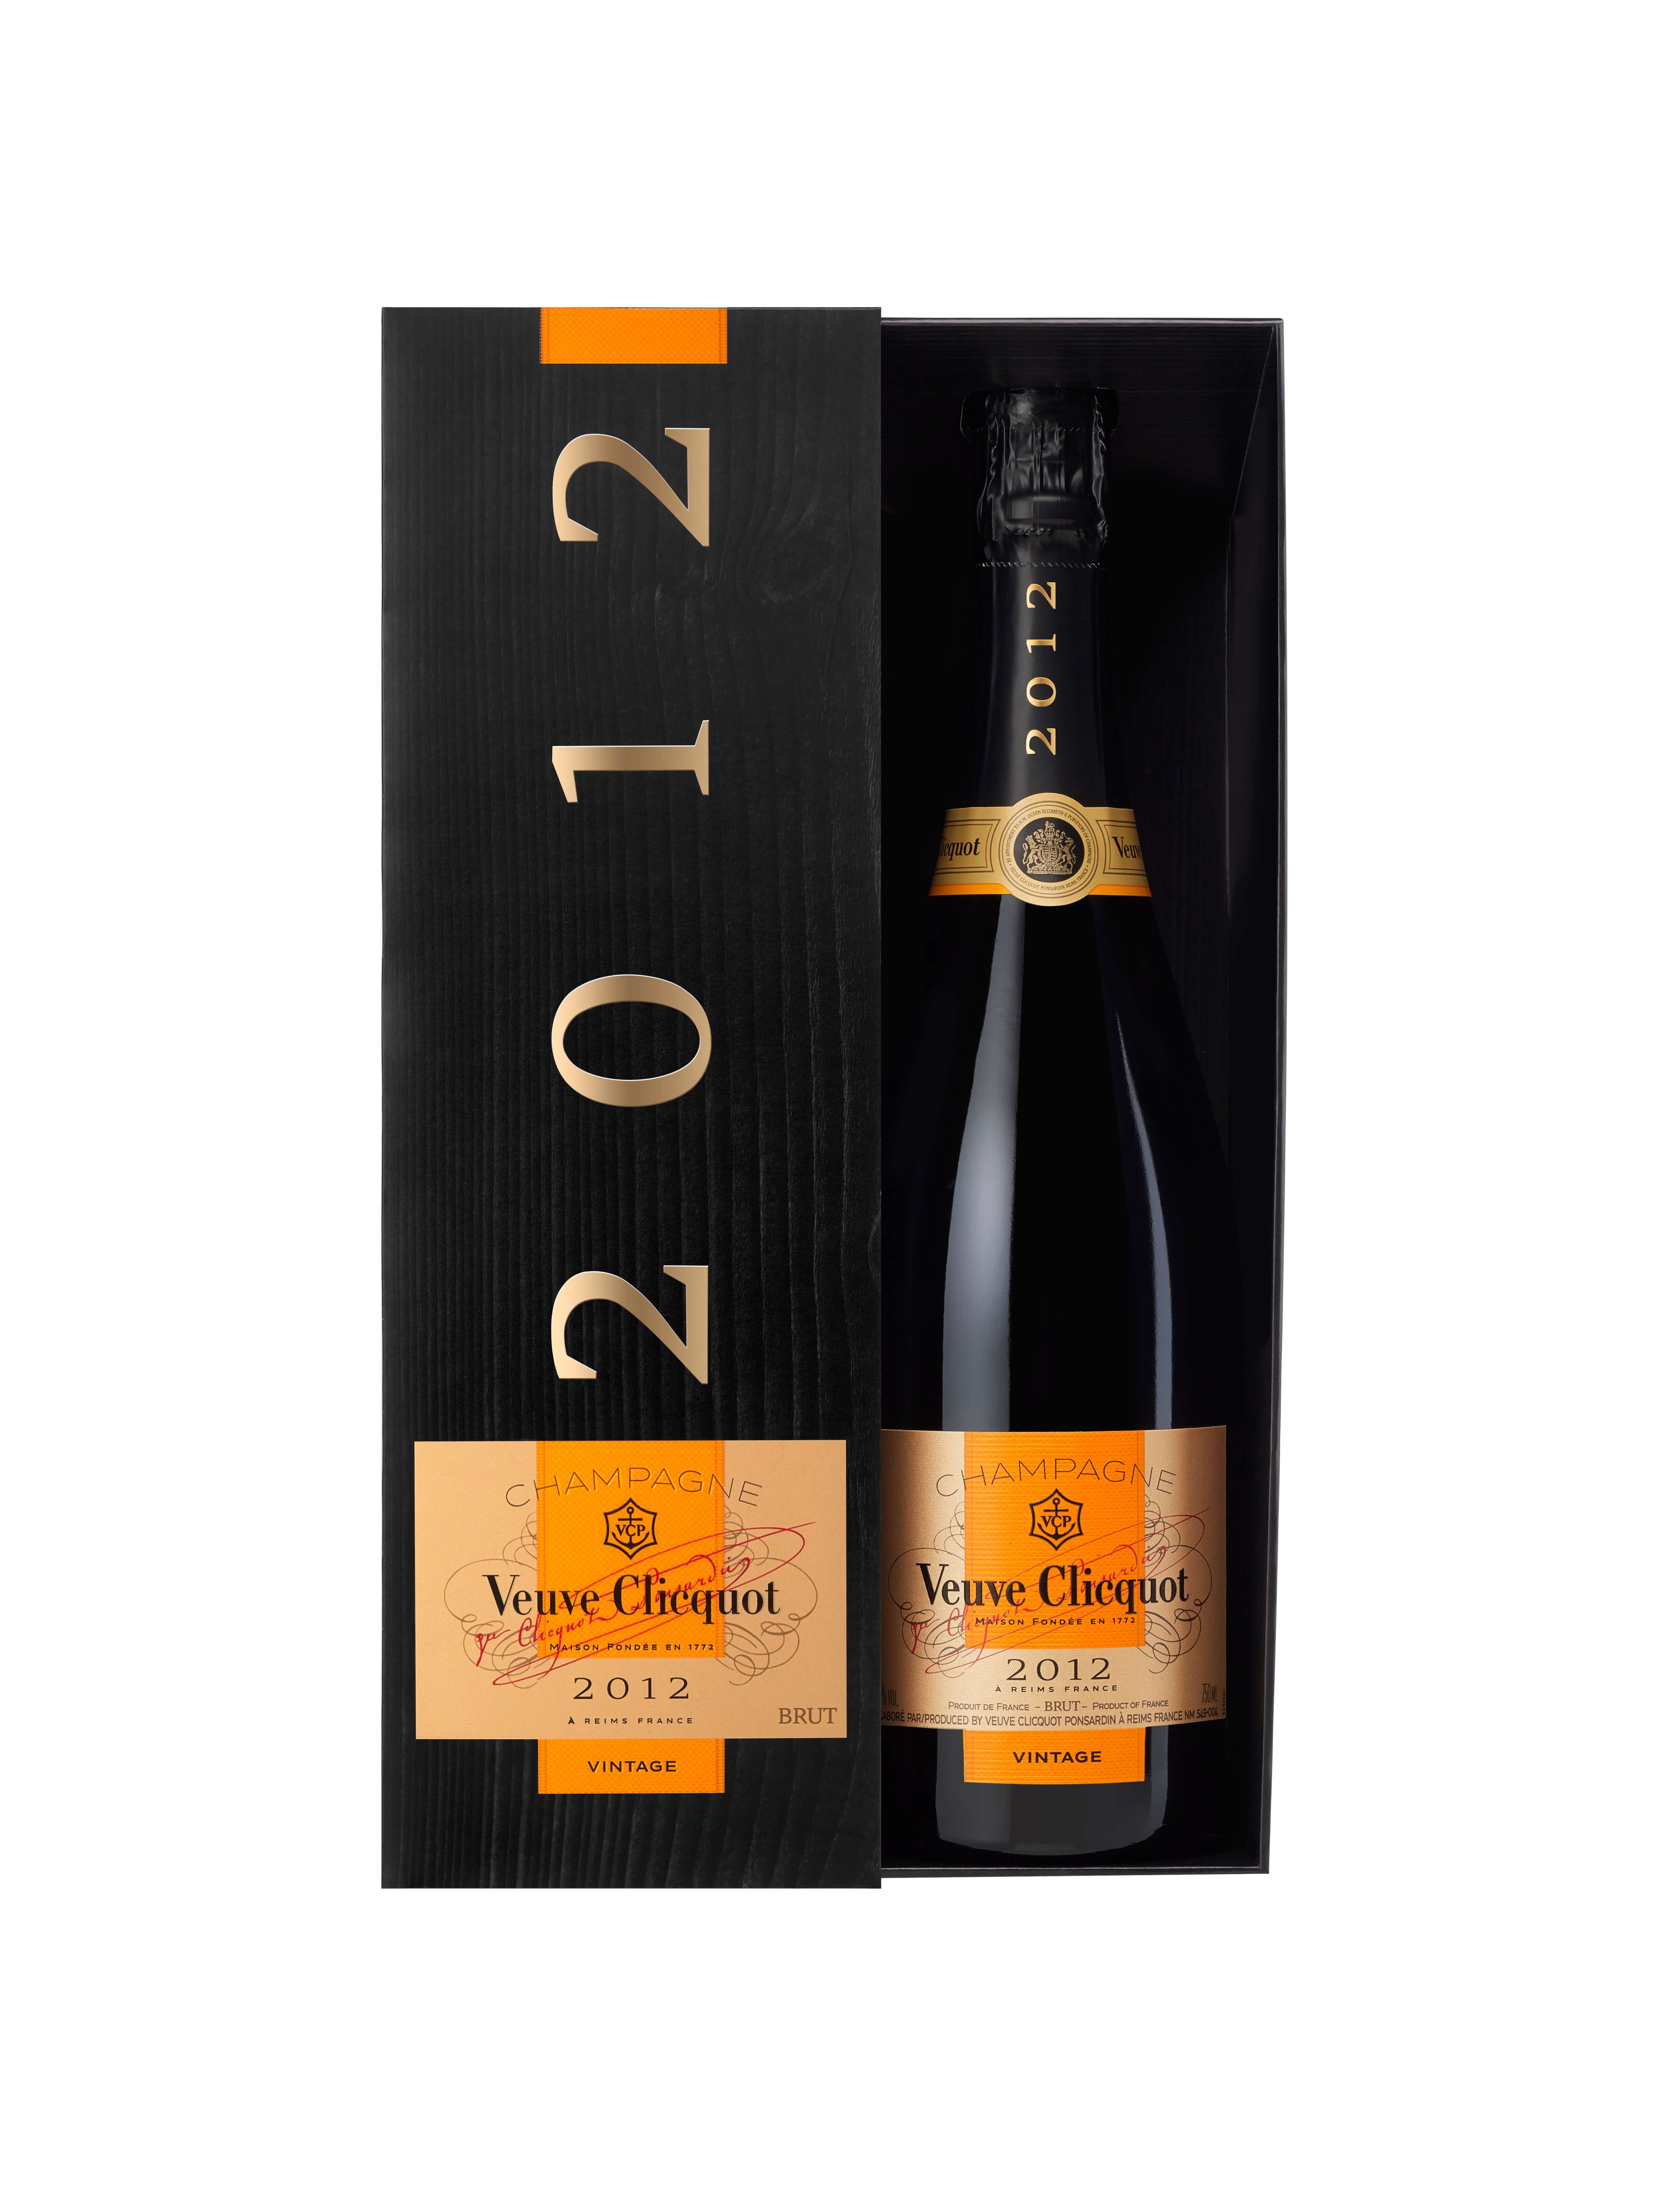 Veuve Clicquot Champagne Vintage 2012 with giftbox